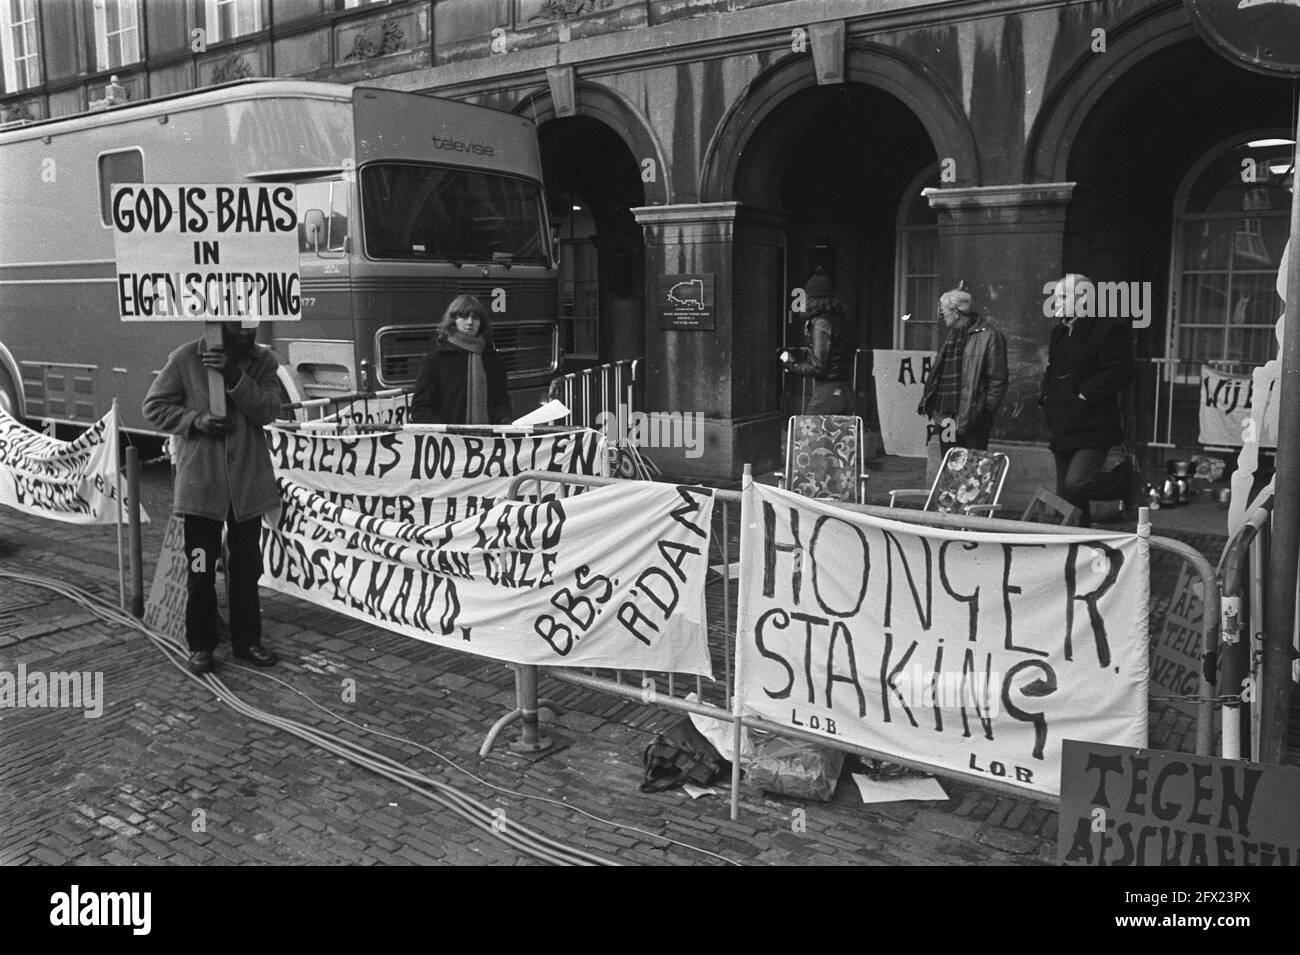 Members of the National Organization of Assistance Workers on Hunger Strike in The Hague; meeting anti-abortion demonstrator with hunger strikers, December 14, 1976, hunger strikers, hunger strikes, members, meetings, The Netherlands, 20th century press agency photo, news to remember, documentary, historic photography 1945-1990, visual stories, human history of the Twentieth Century, capturing moments in time Stock Photo